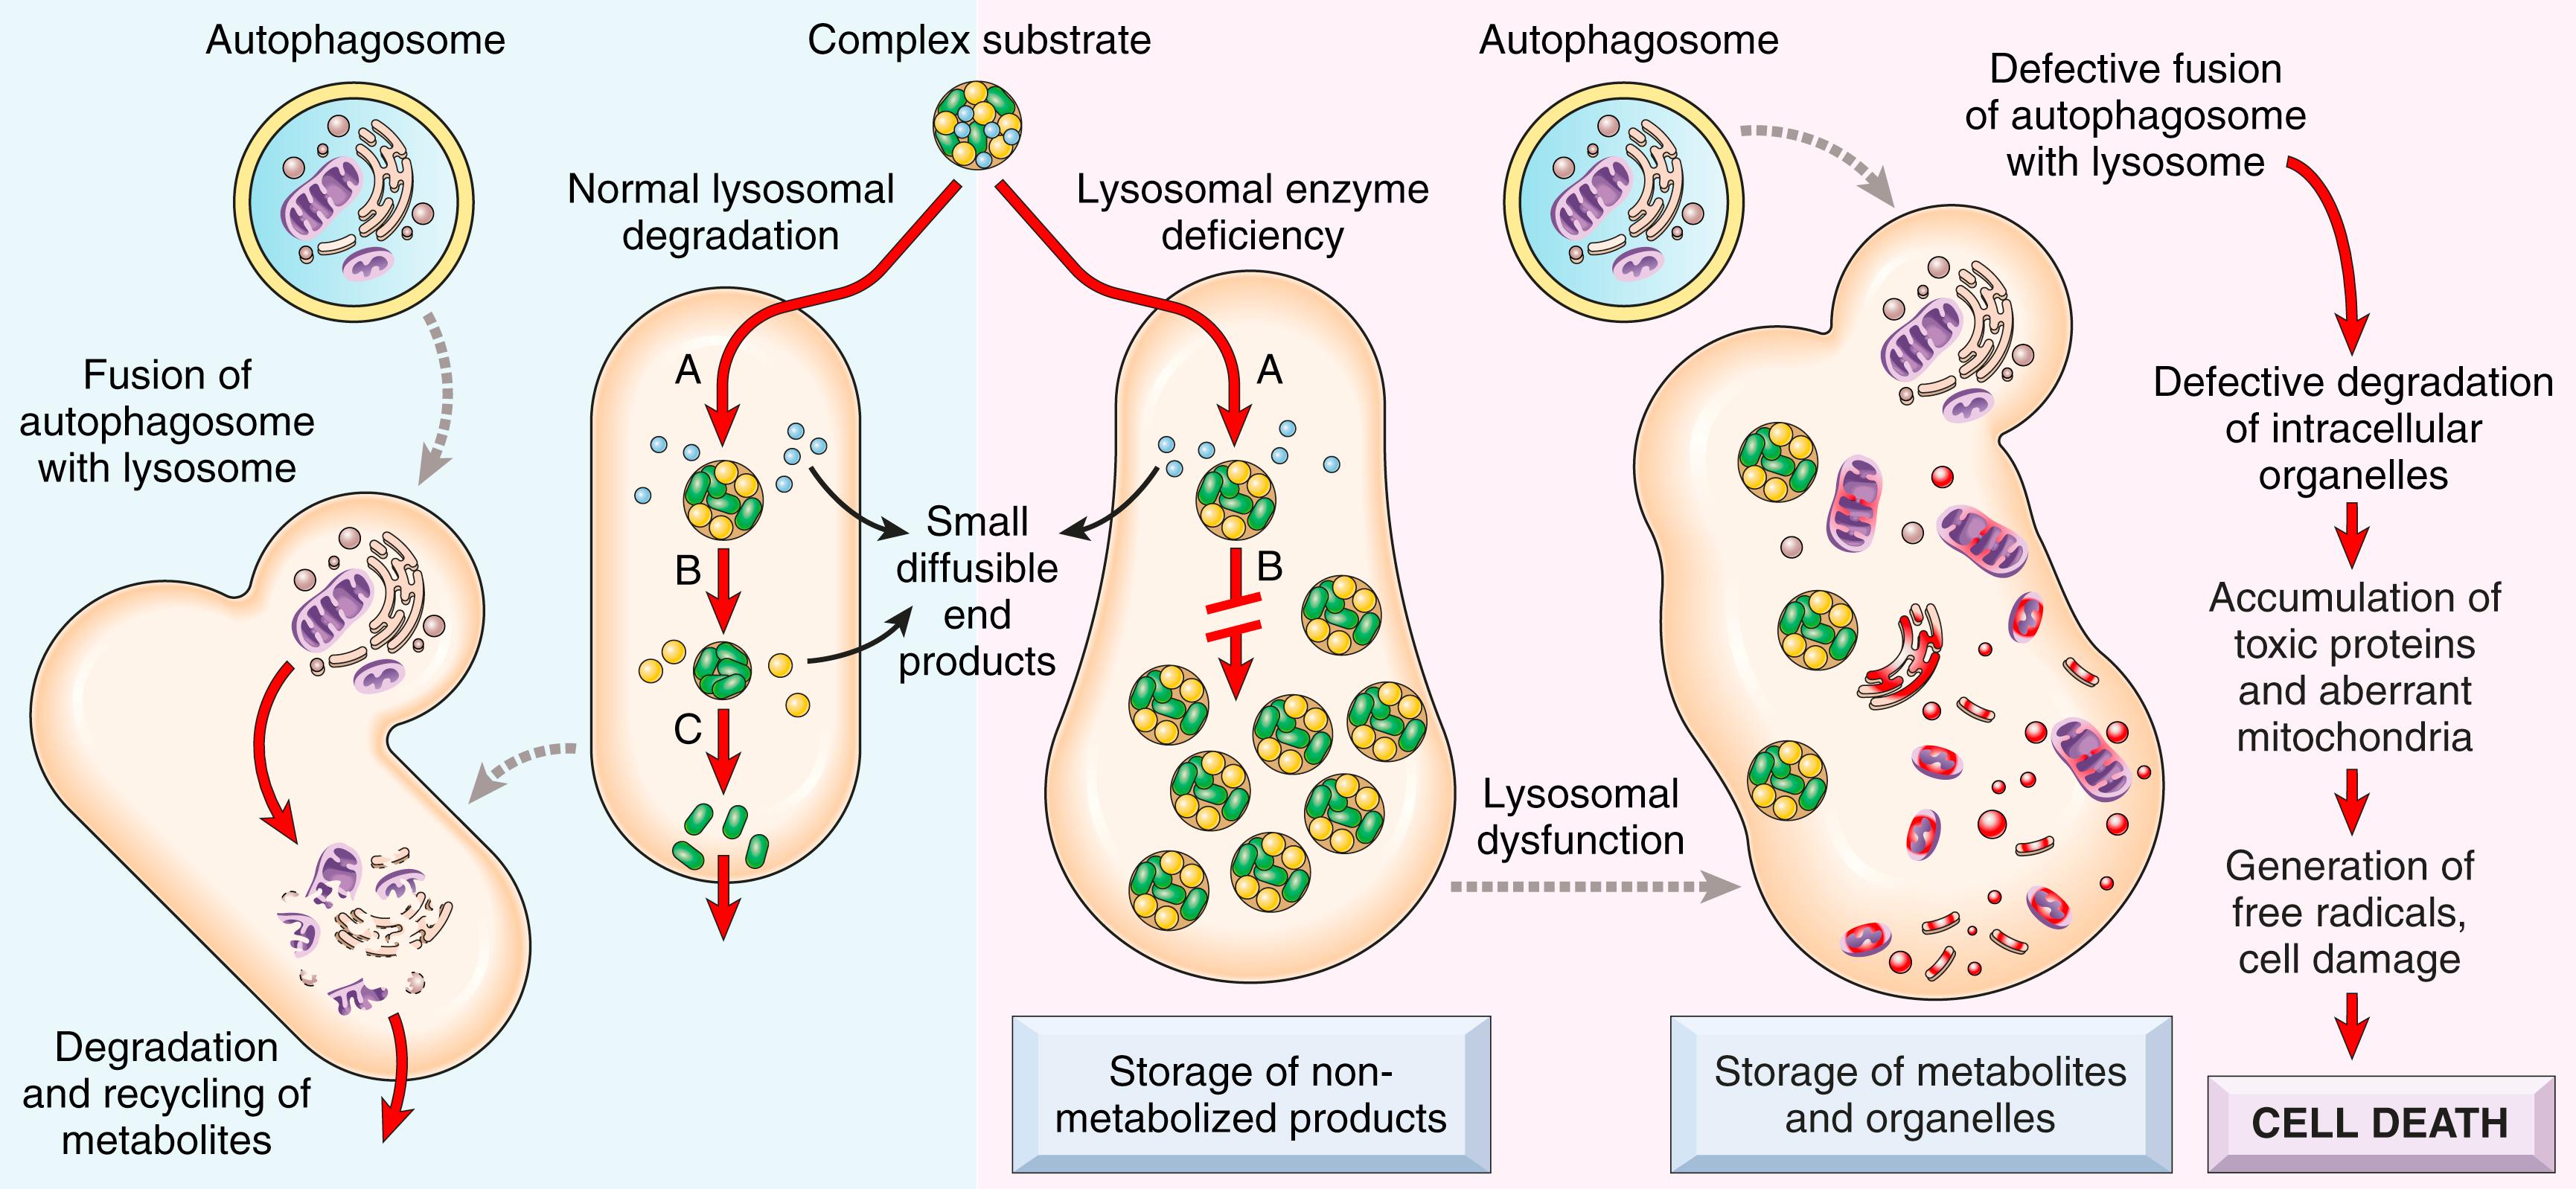 FIG. 4.12, Pathogenesis of lysosomal storage diseases. In this example, a complex substrate is normally degraded by a series of lysosomal enzymes labeled A, B, and C into small soluble end products. If there is a deficiency or malfunction of one of the enzymes (e.g., B), catabolism is incomplete, and insoluble intermediates accumulate in the lysosomes. In addition to this primary storage, secondary storage and toxic effects result from defective autophagy.